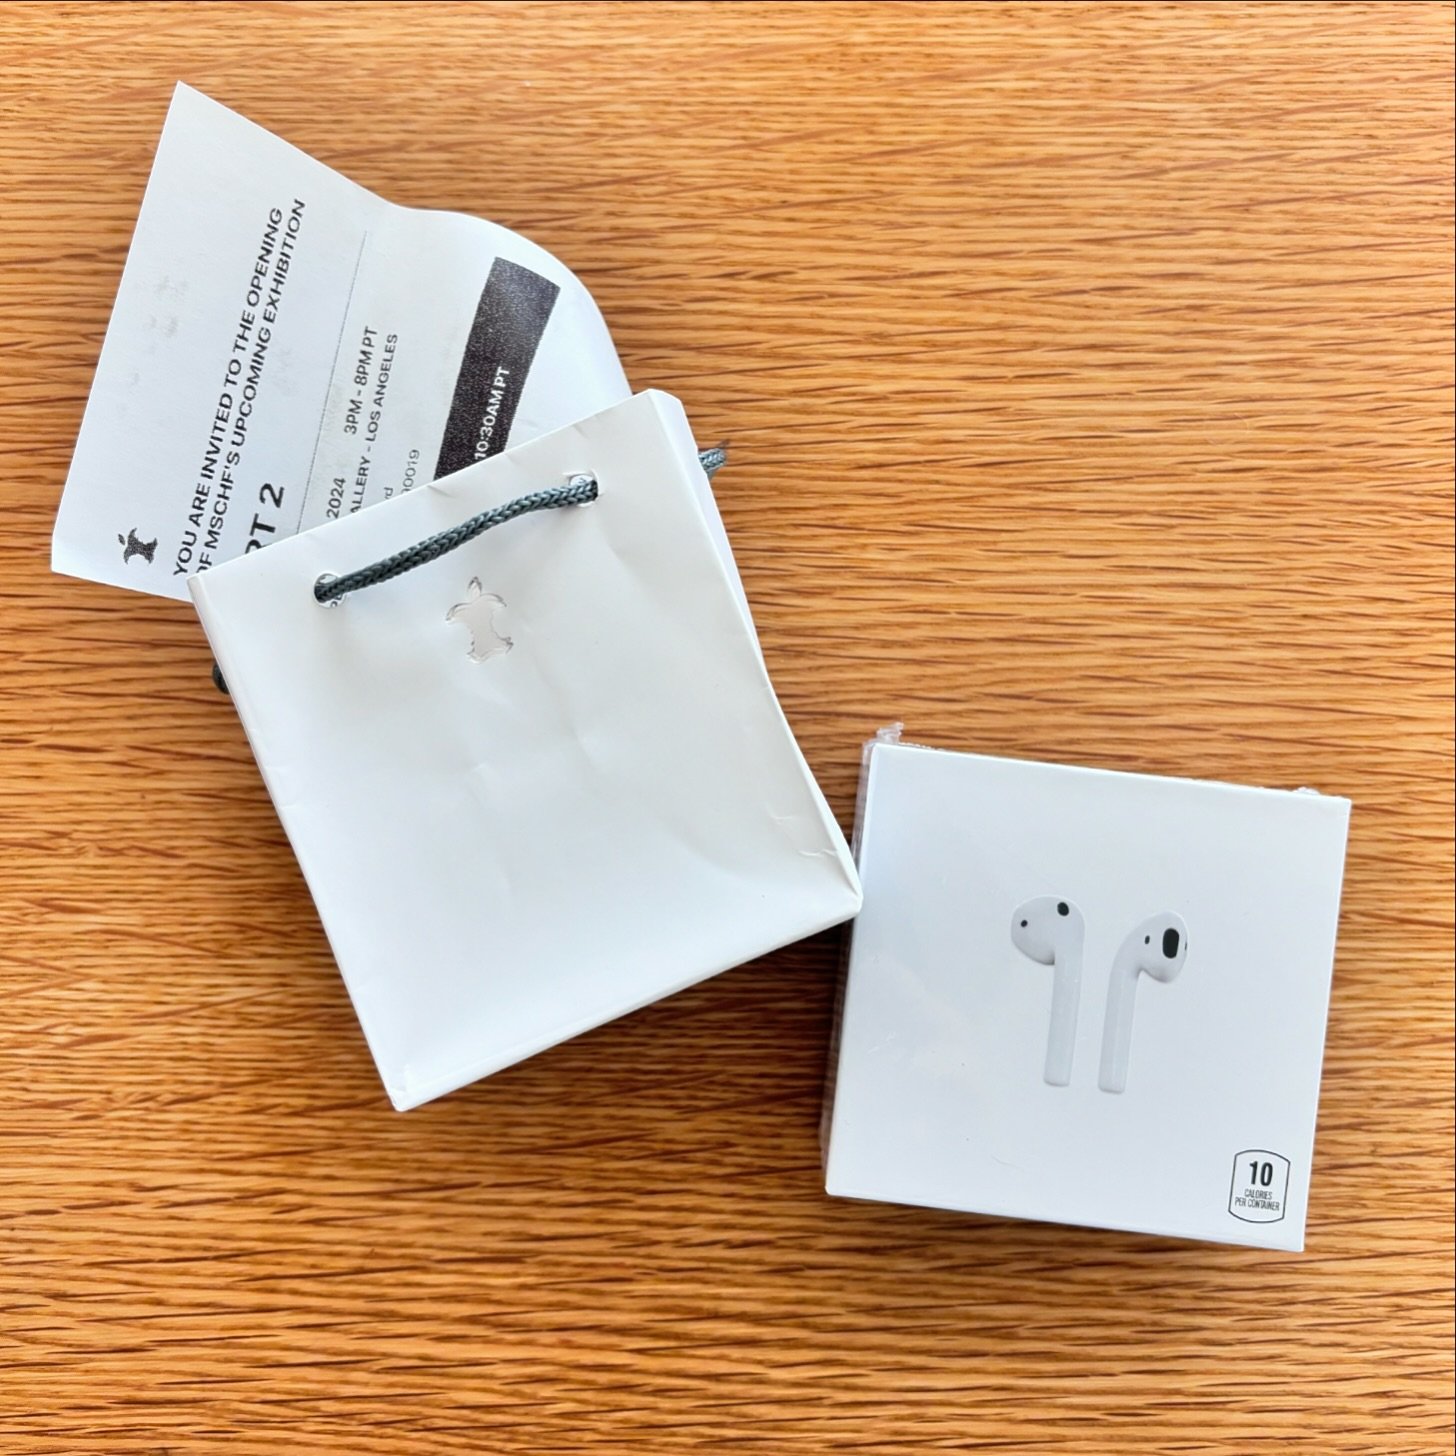 April Fools! What we thought were a new pair of AirPods is actually an invite to @mschf &lsquo;s upcoming exhibition at @perrotin LA. The logo with two bites out the apple should have given it away, even the receipt was convincing, and the AirPods ar